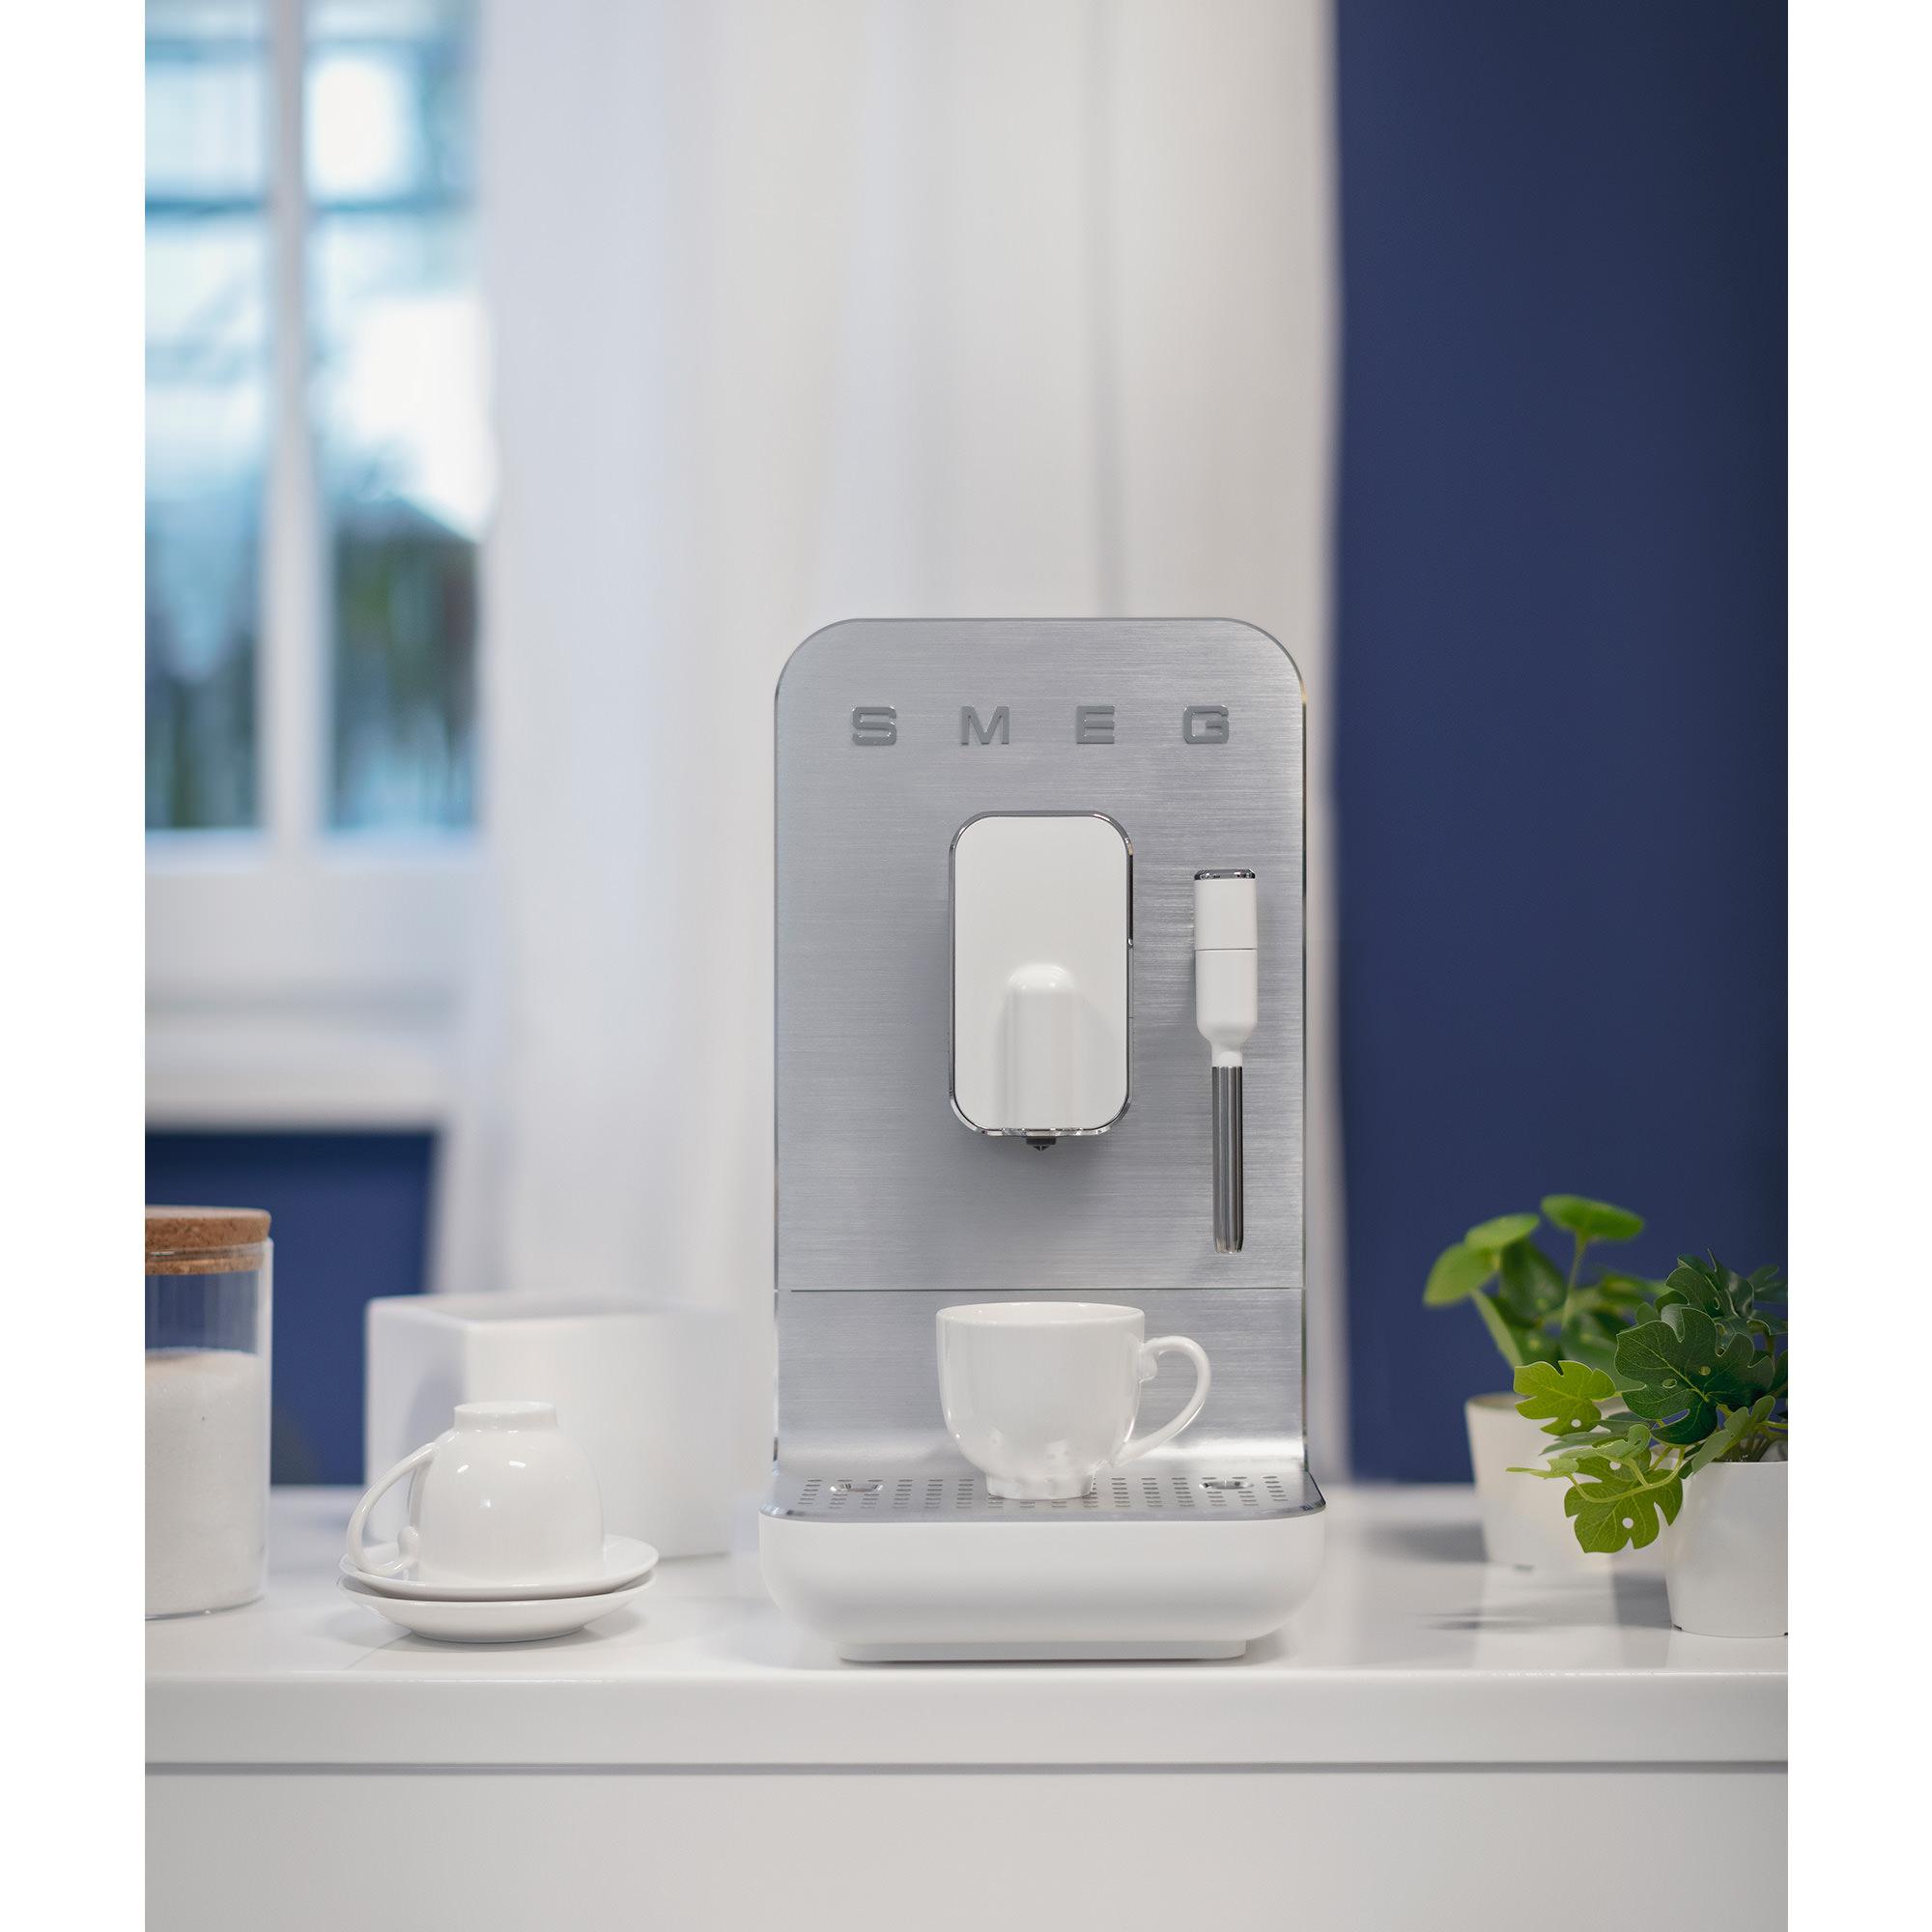 Smeg Bean to Cup Fully Automatic Coffee Machine with Frother White Matte Image 5